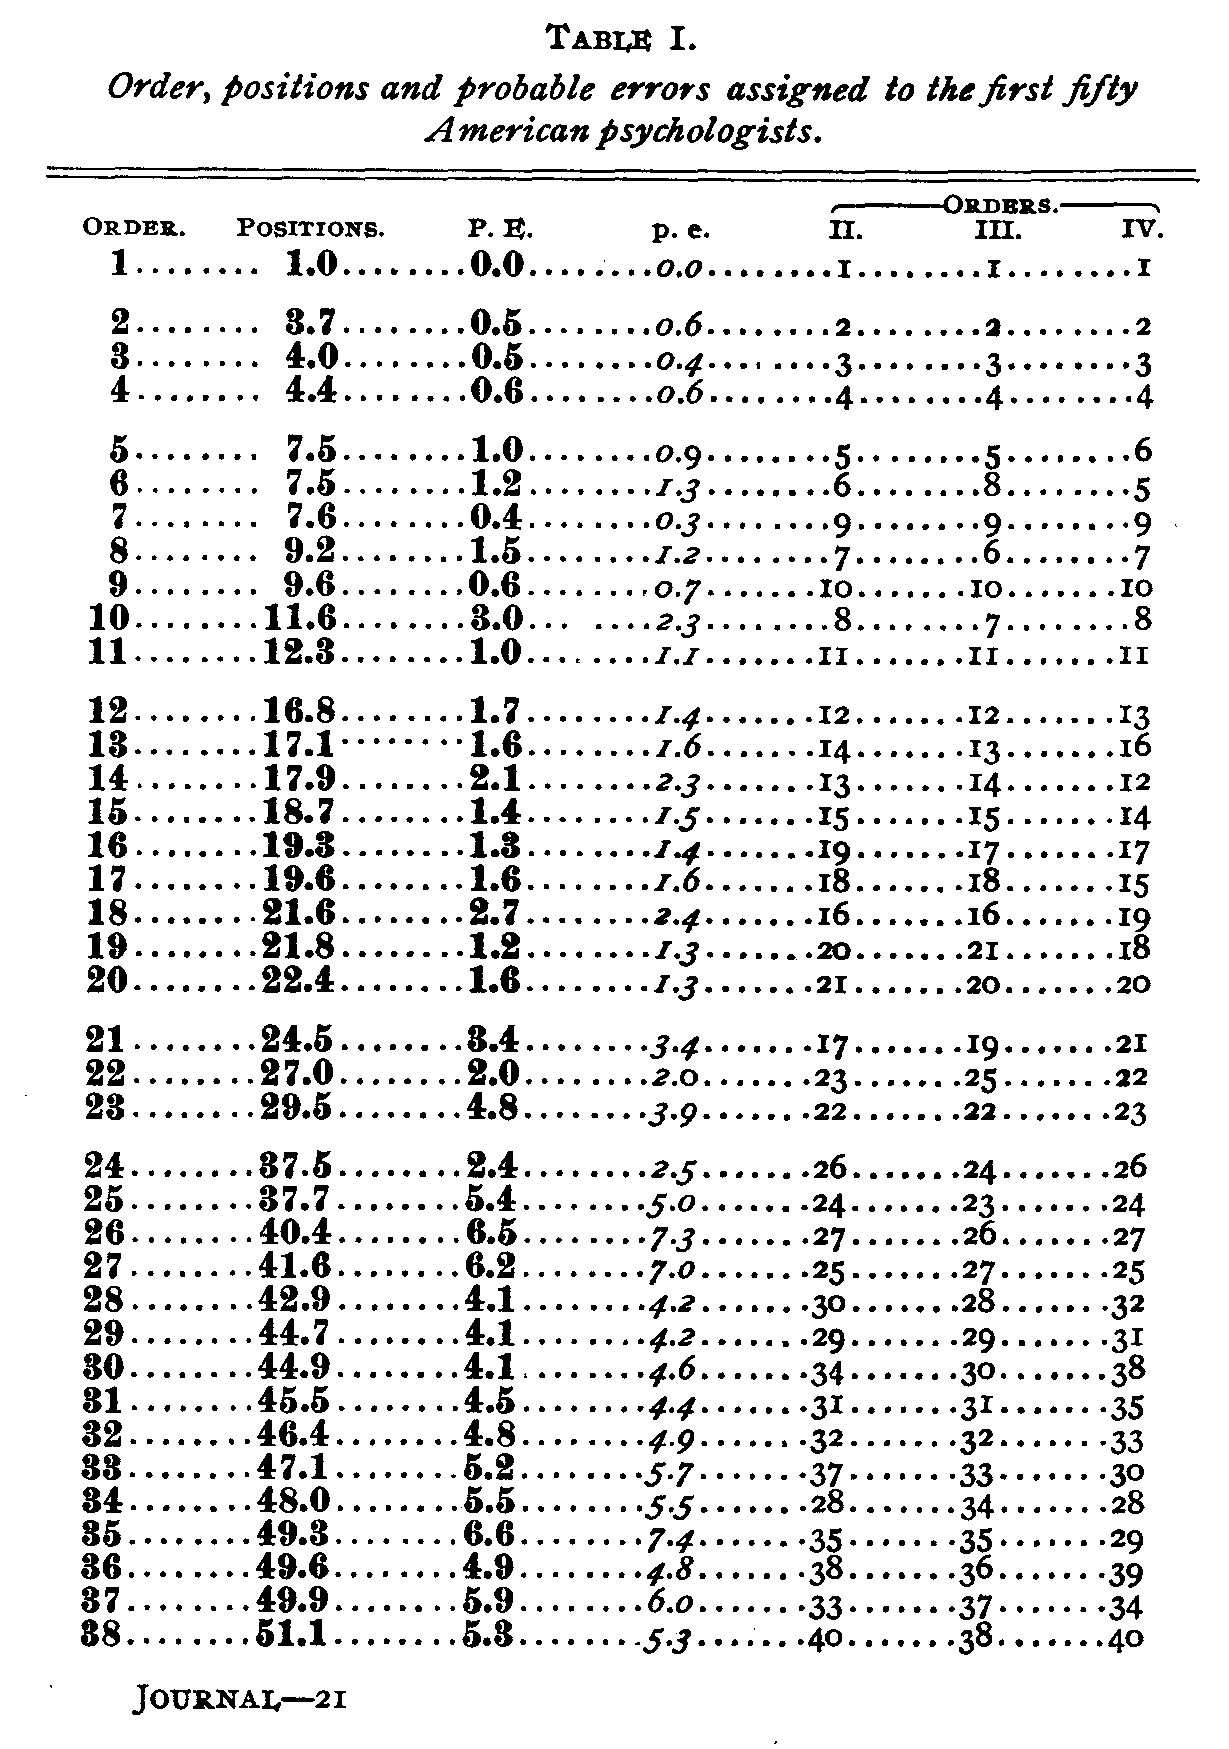 Table 1, Order, positions and probable errors assigned to the first fifty american psychologists